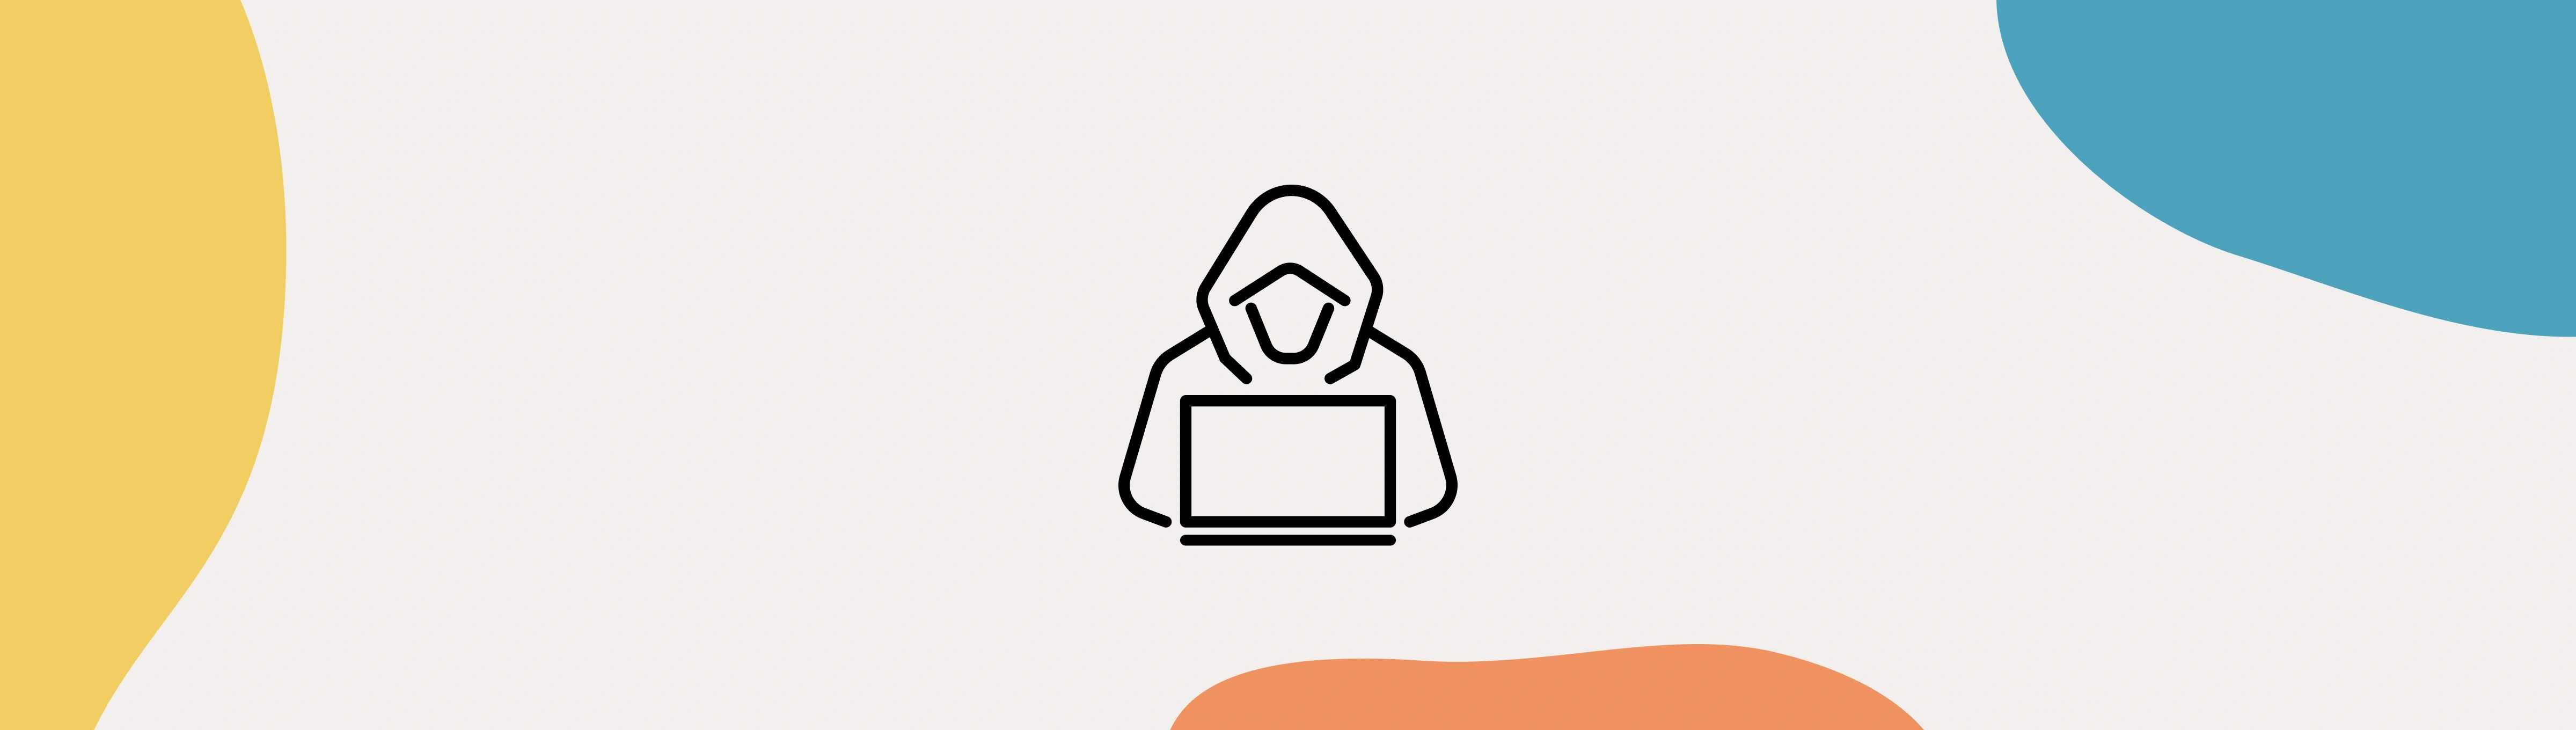 A hooded person working on laptop